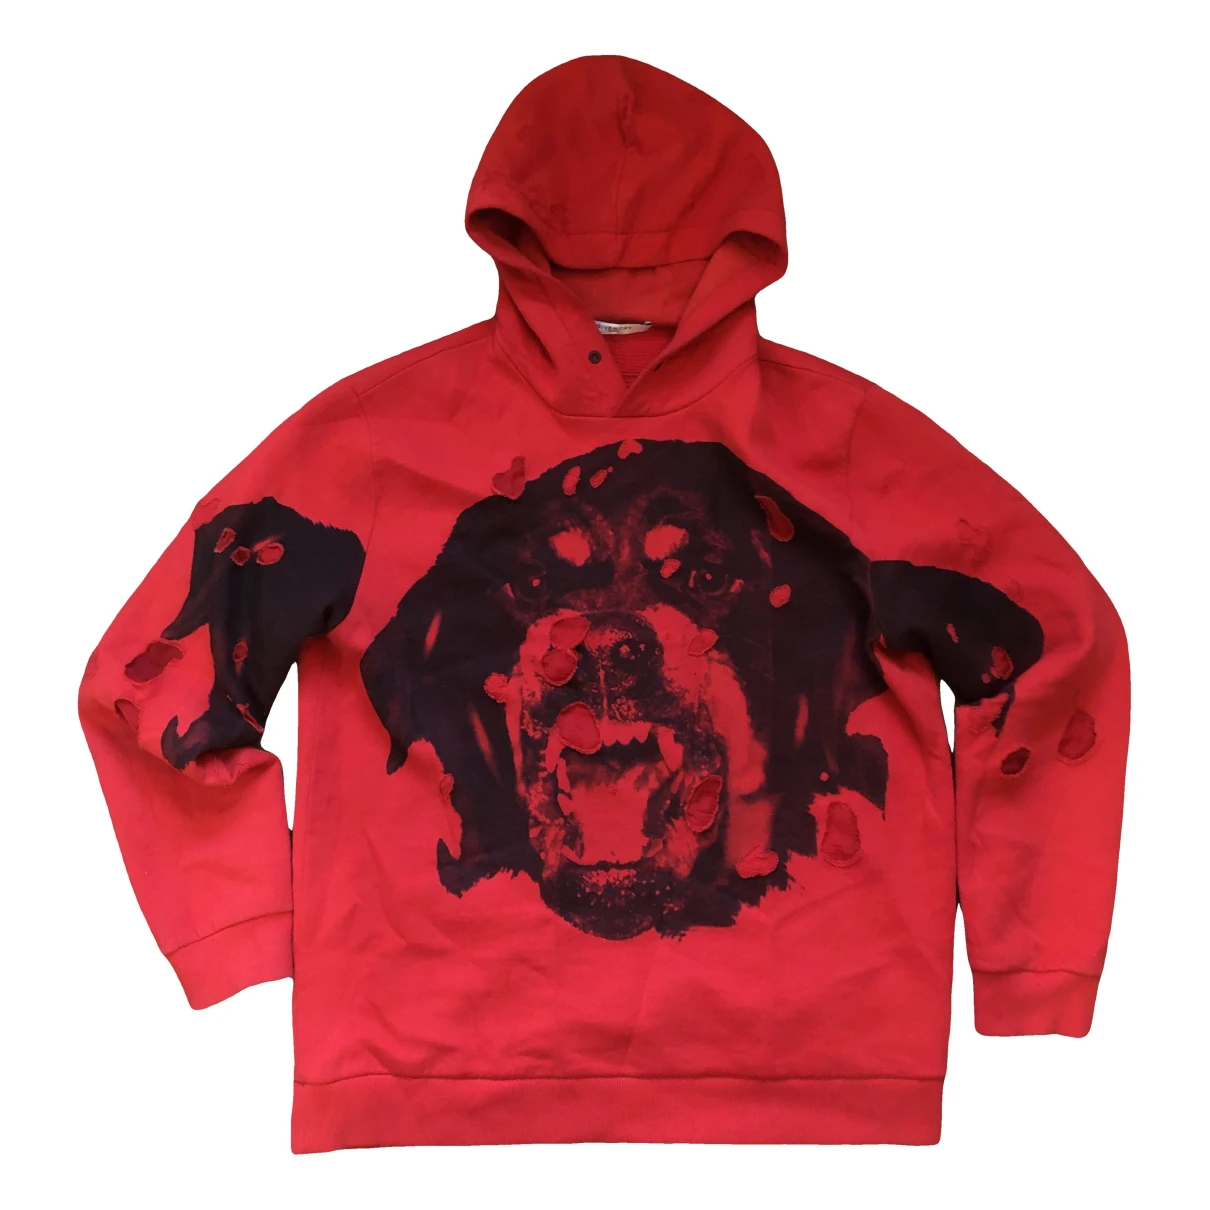 Pre-owned Givenchy Sweatshirt In Red